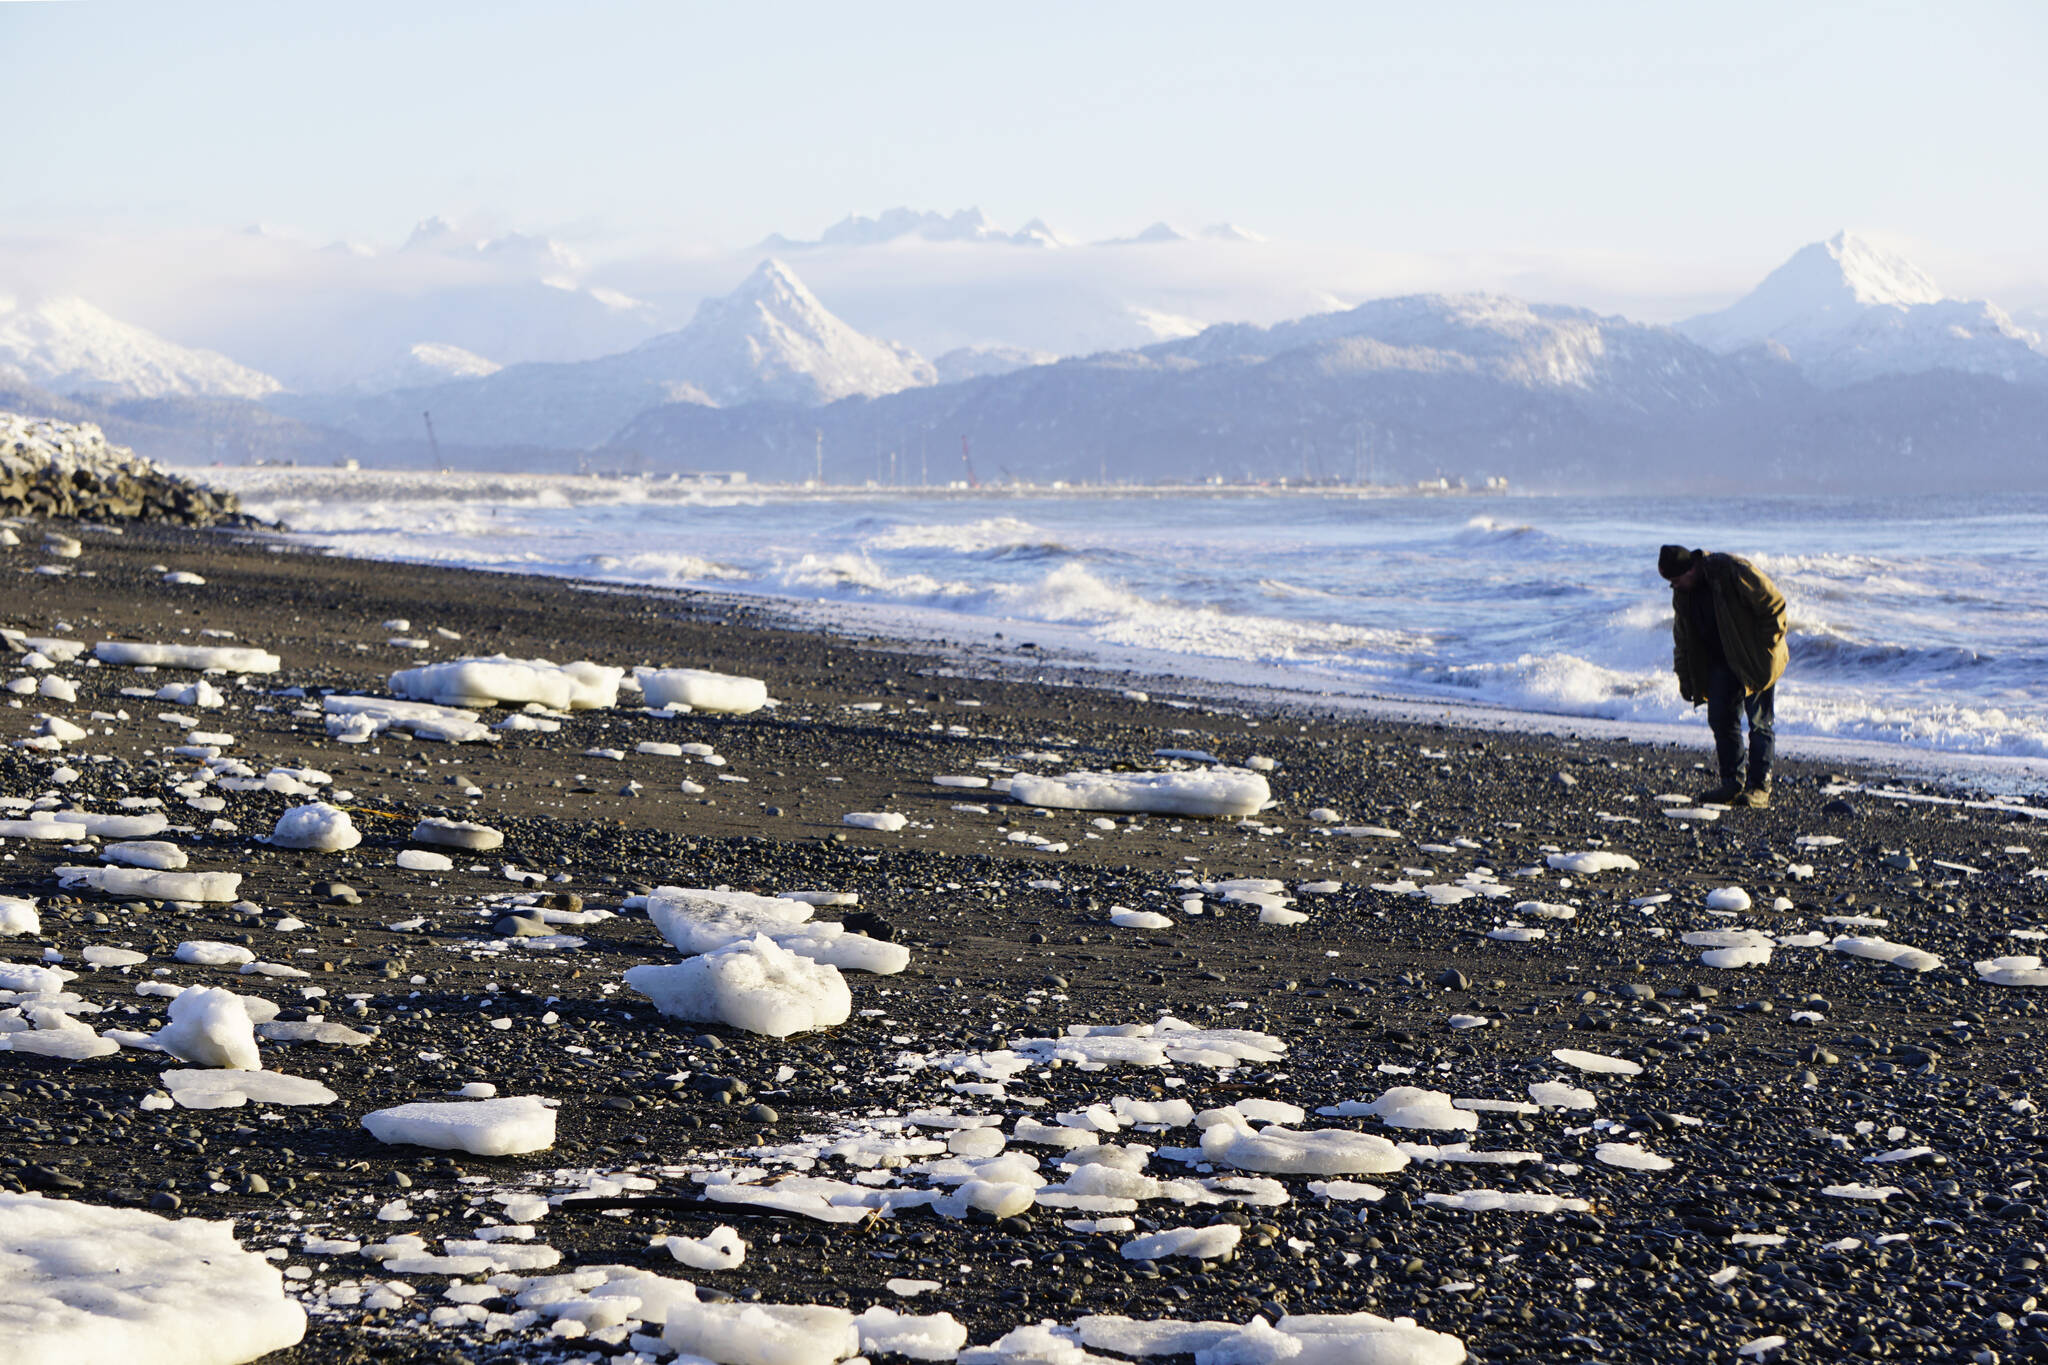 Ice lies scattered on the beach on Thursday, Dec. 2, 2021, at Mariner Park on the Homer Spit, Alaska. Extreme high tides last week pushed ice bergs from the bay up on the beach. (Photo by Michael Armstrong/Homer News)